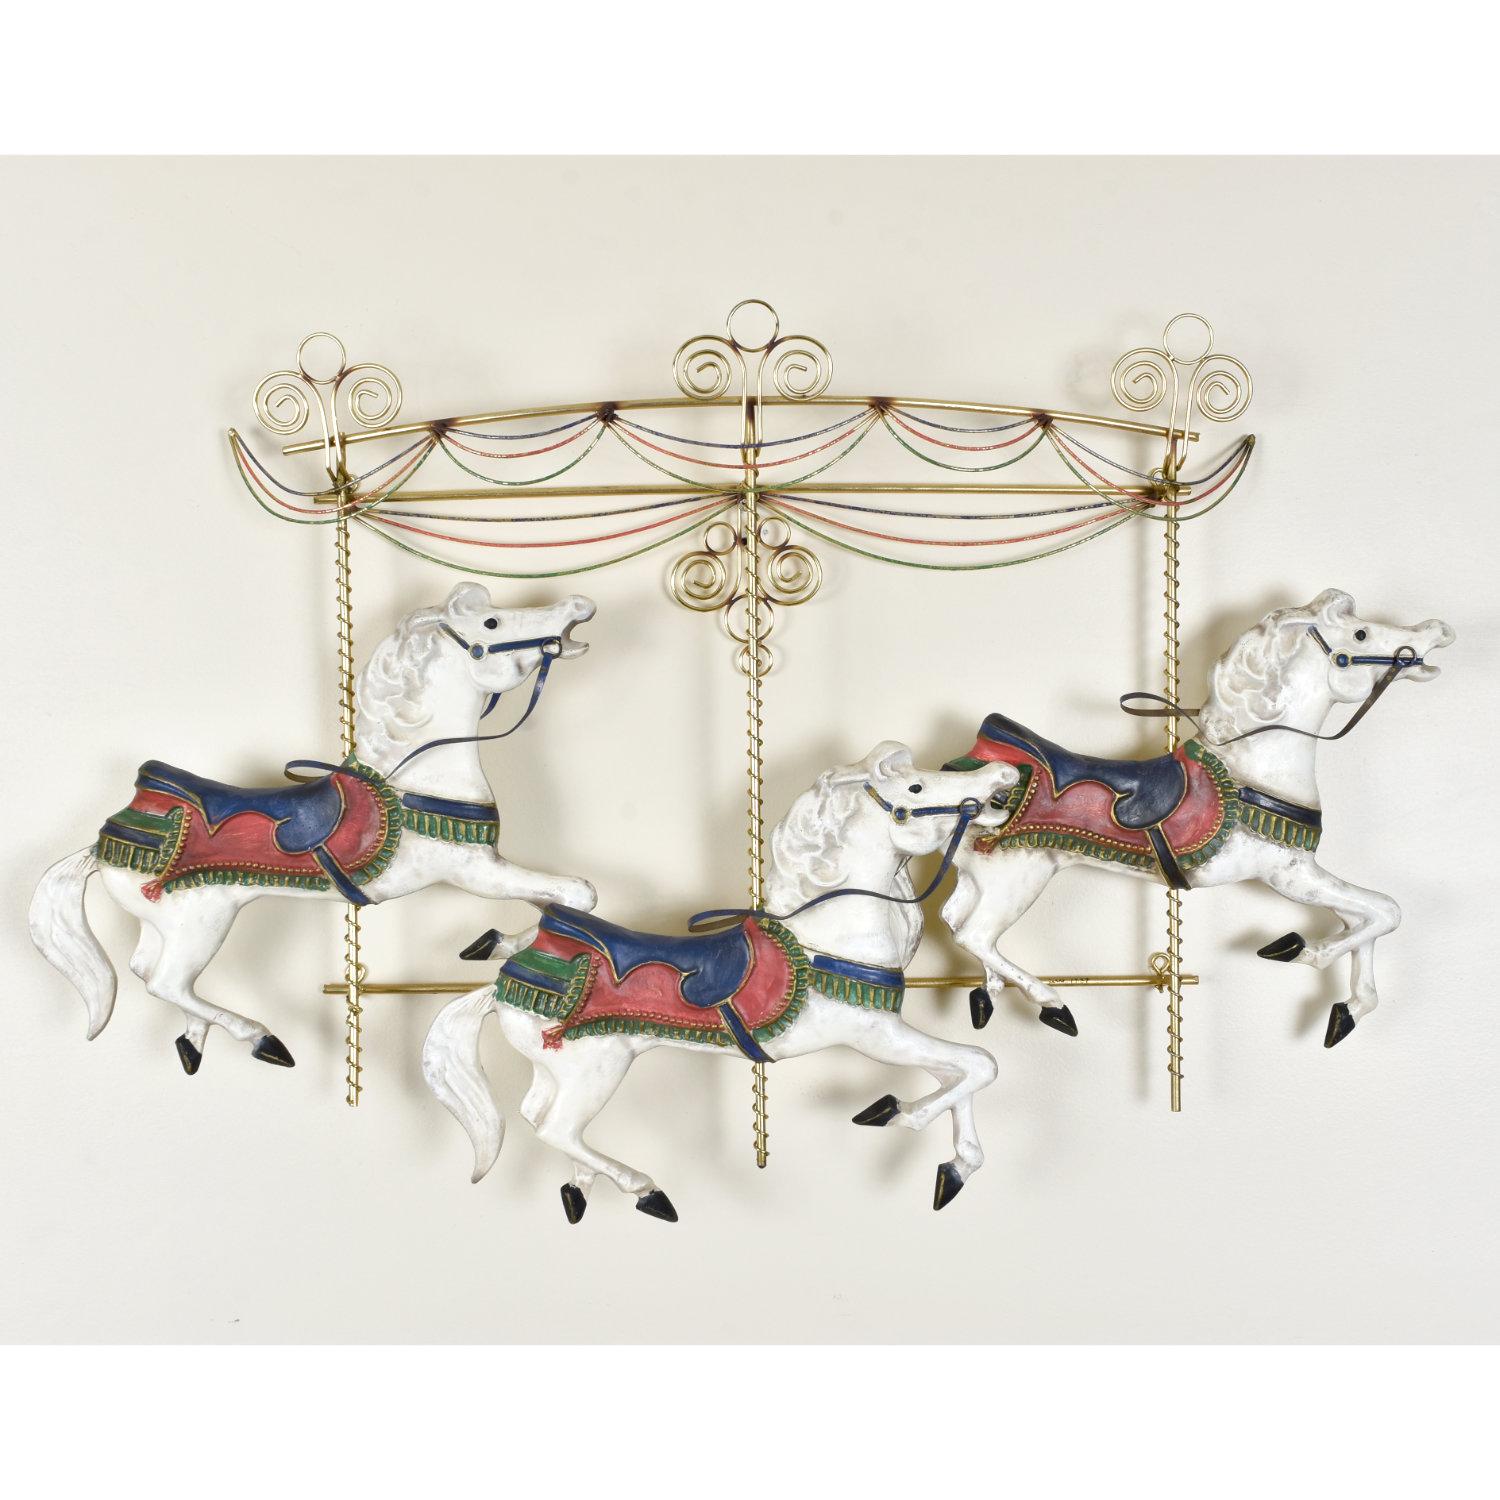 Curtis Jere whimsical leaping carousel horse metal wall sculpture: Signed, Curtis Jere. The sheer size of this Nineteen-Laties piece will fill a room with excitement. The larger than life sculpture spans nearly four feet! This dynamic wall art